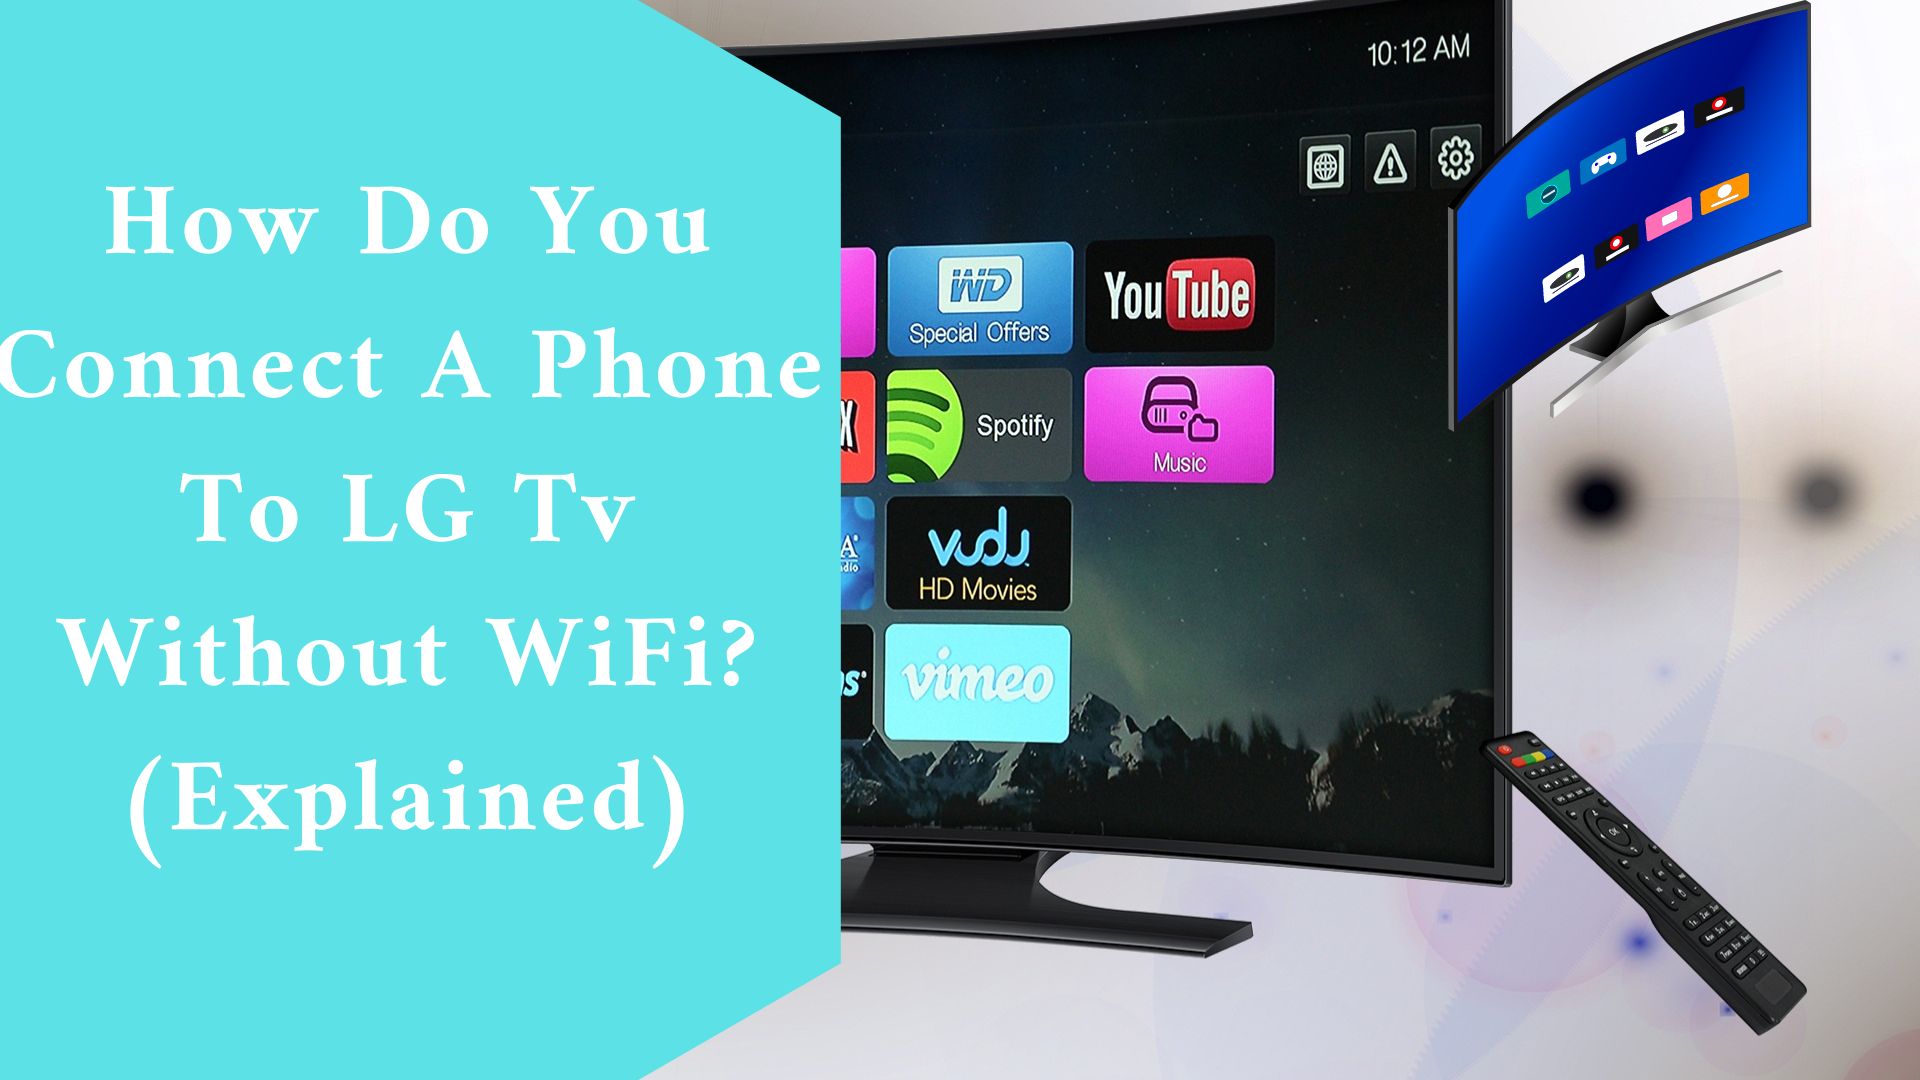 How Do You Connect A Phone To LG Tv Without WiFi? (Explained)